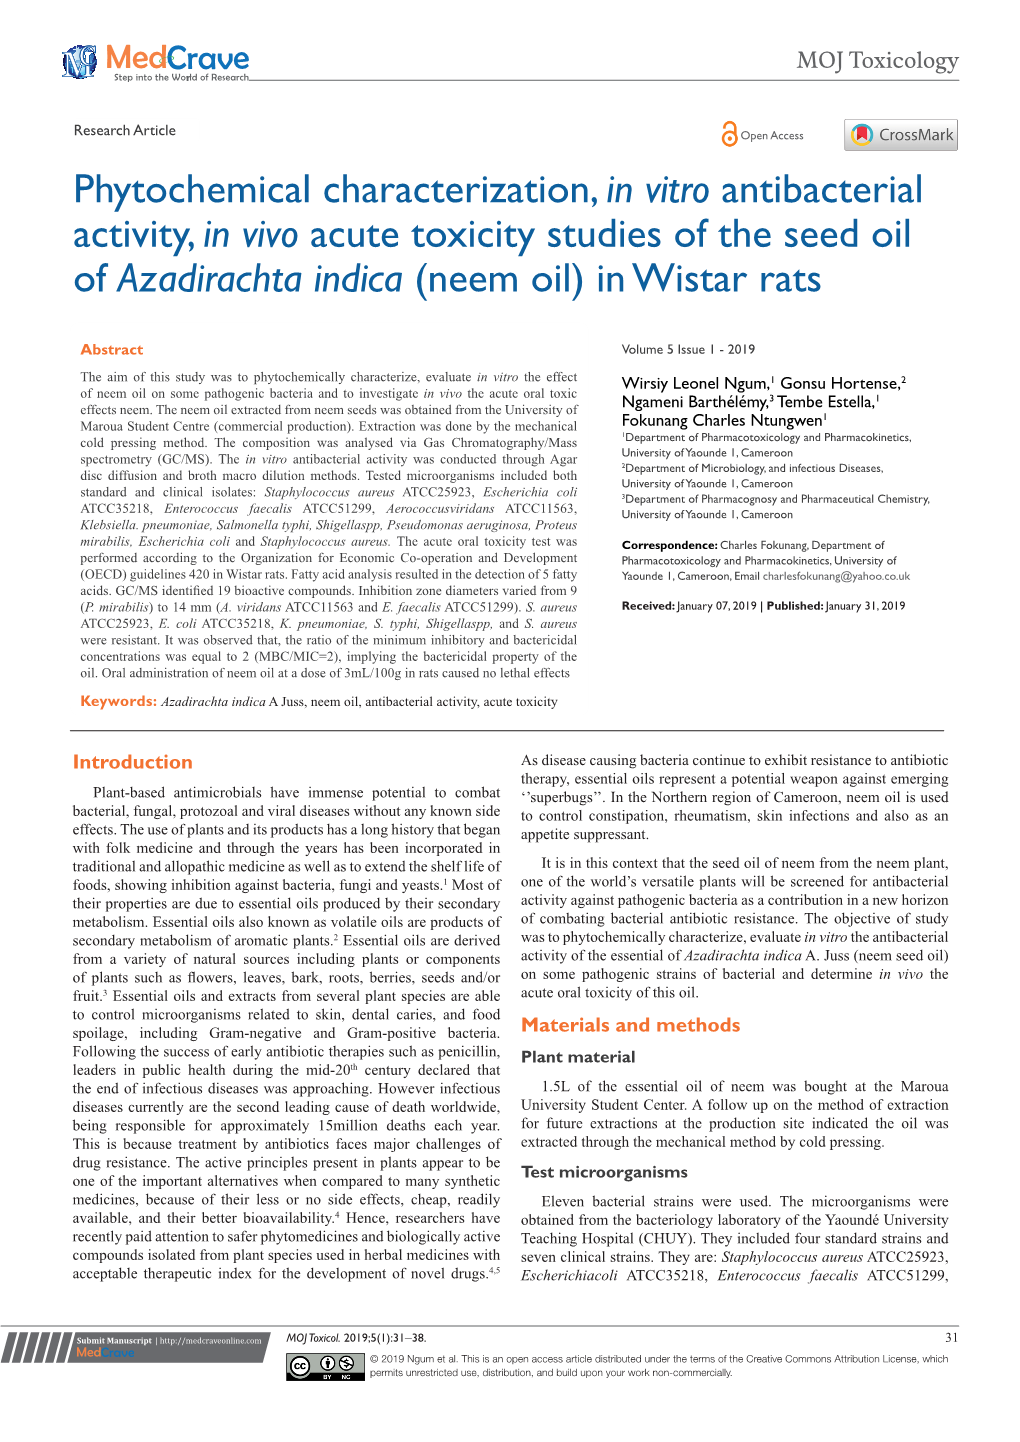 Phytochemical Characterization, in Vitro Antibacterial Activity, in Vivo Acute Toxicity Studies of the Seed Oil of Azadirachta Indica (Neem Oil) in Wistar Rats